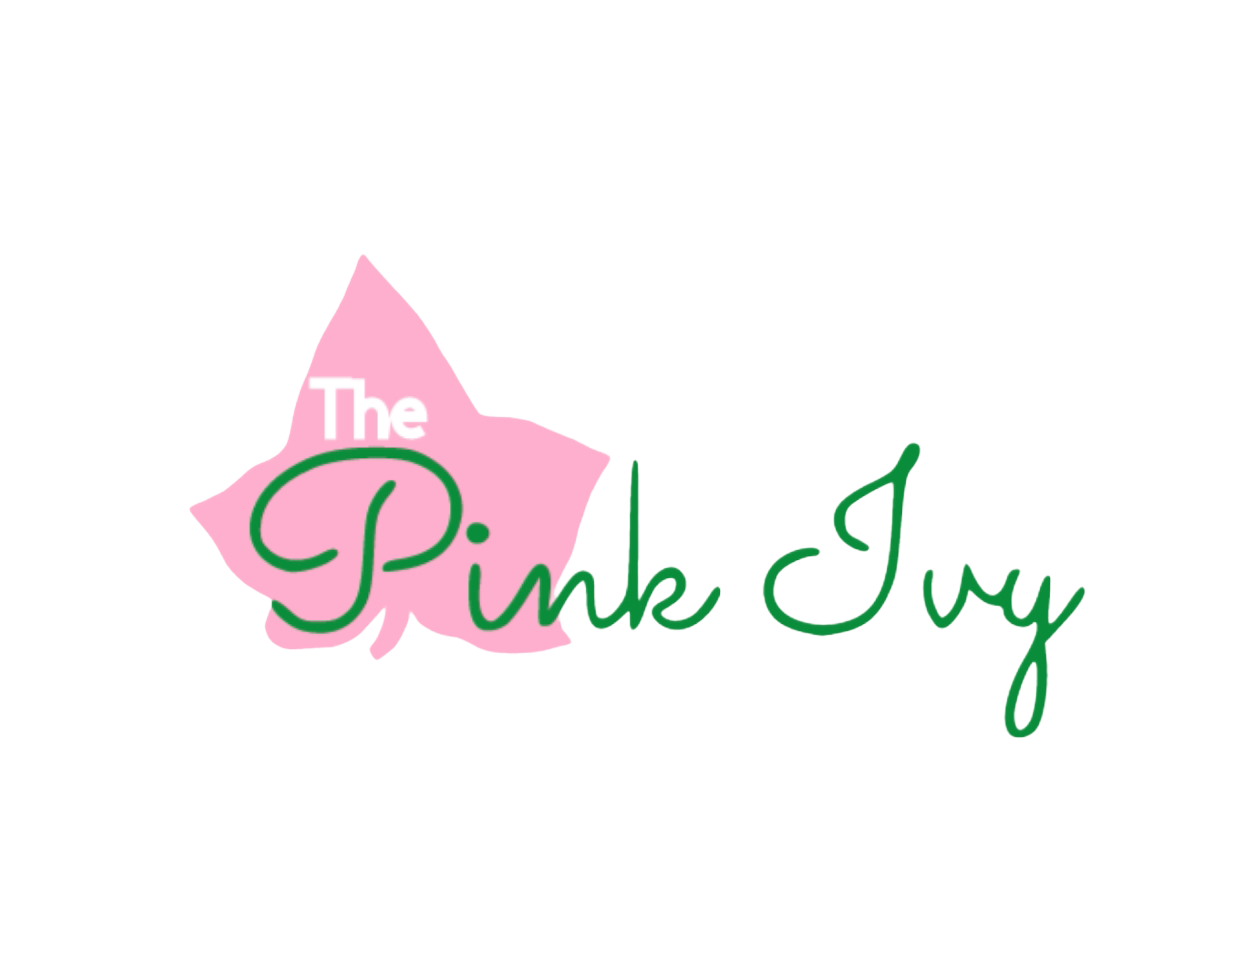 The logo or business face of "The Pink Ivy Store"